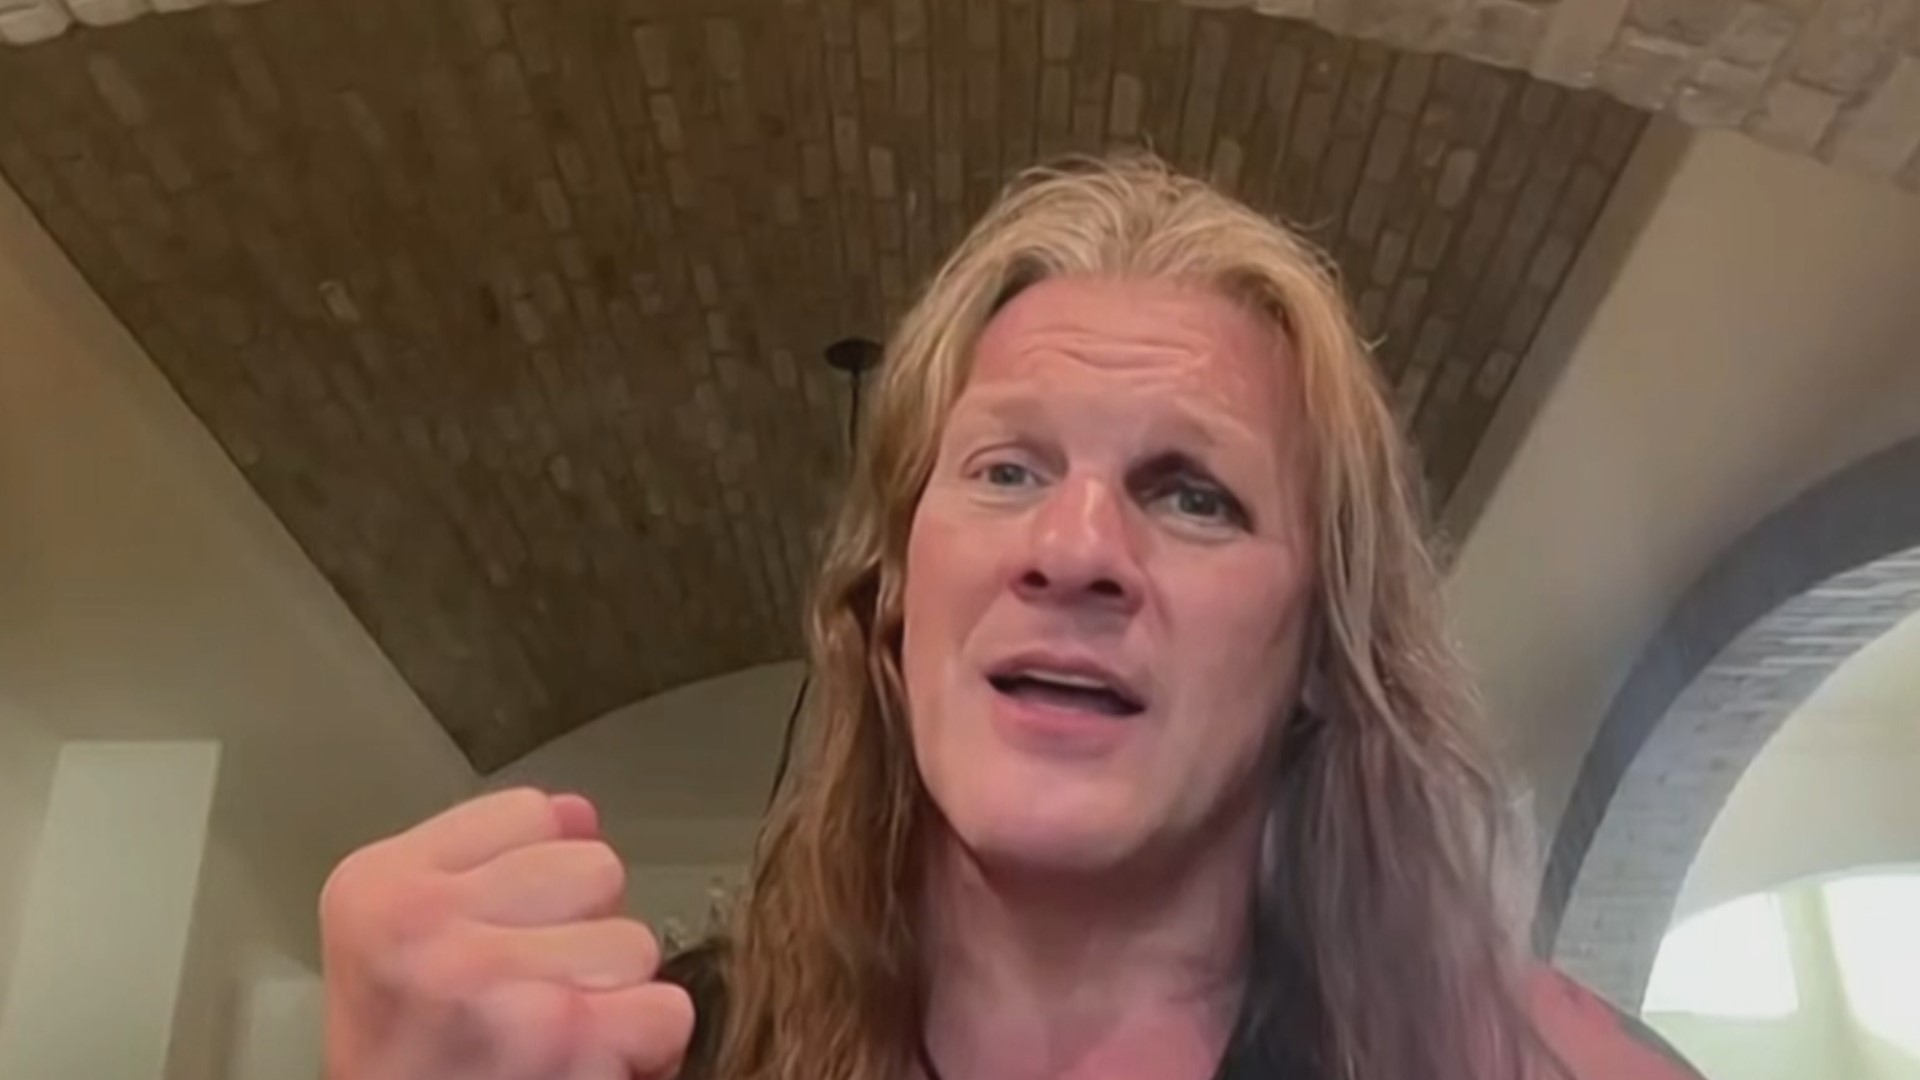 Wrestling legend and lead singer of Fozzy talks with 11Alive about his career, his memories of performing in Atlanta, and All Elite Wrestling’s upcoming show.